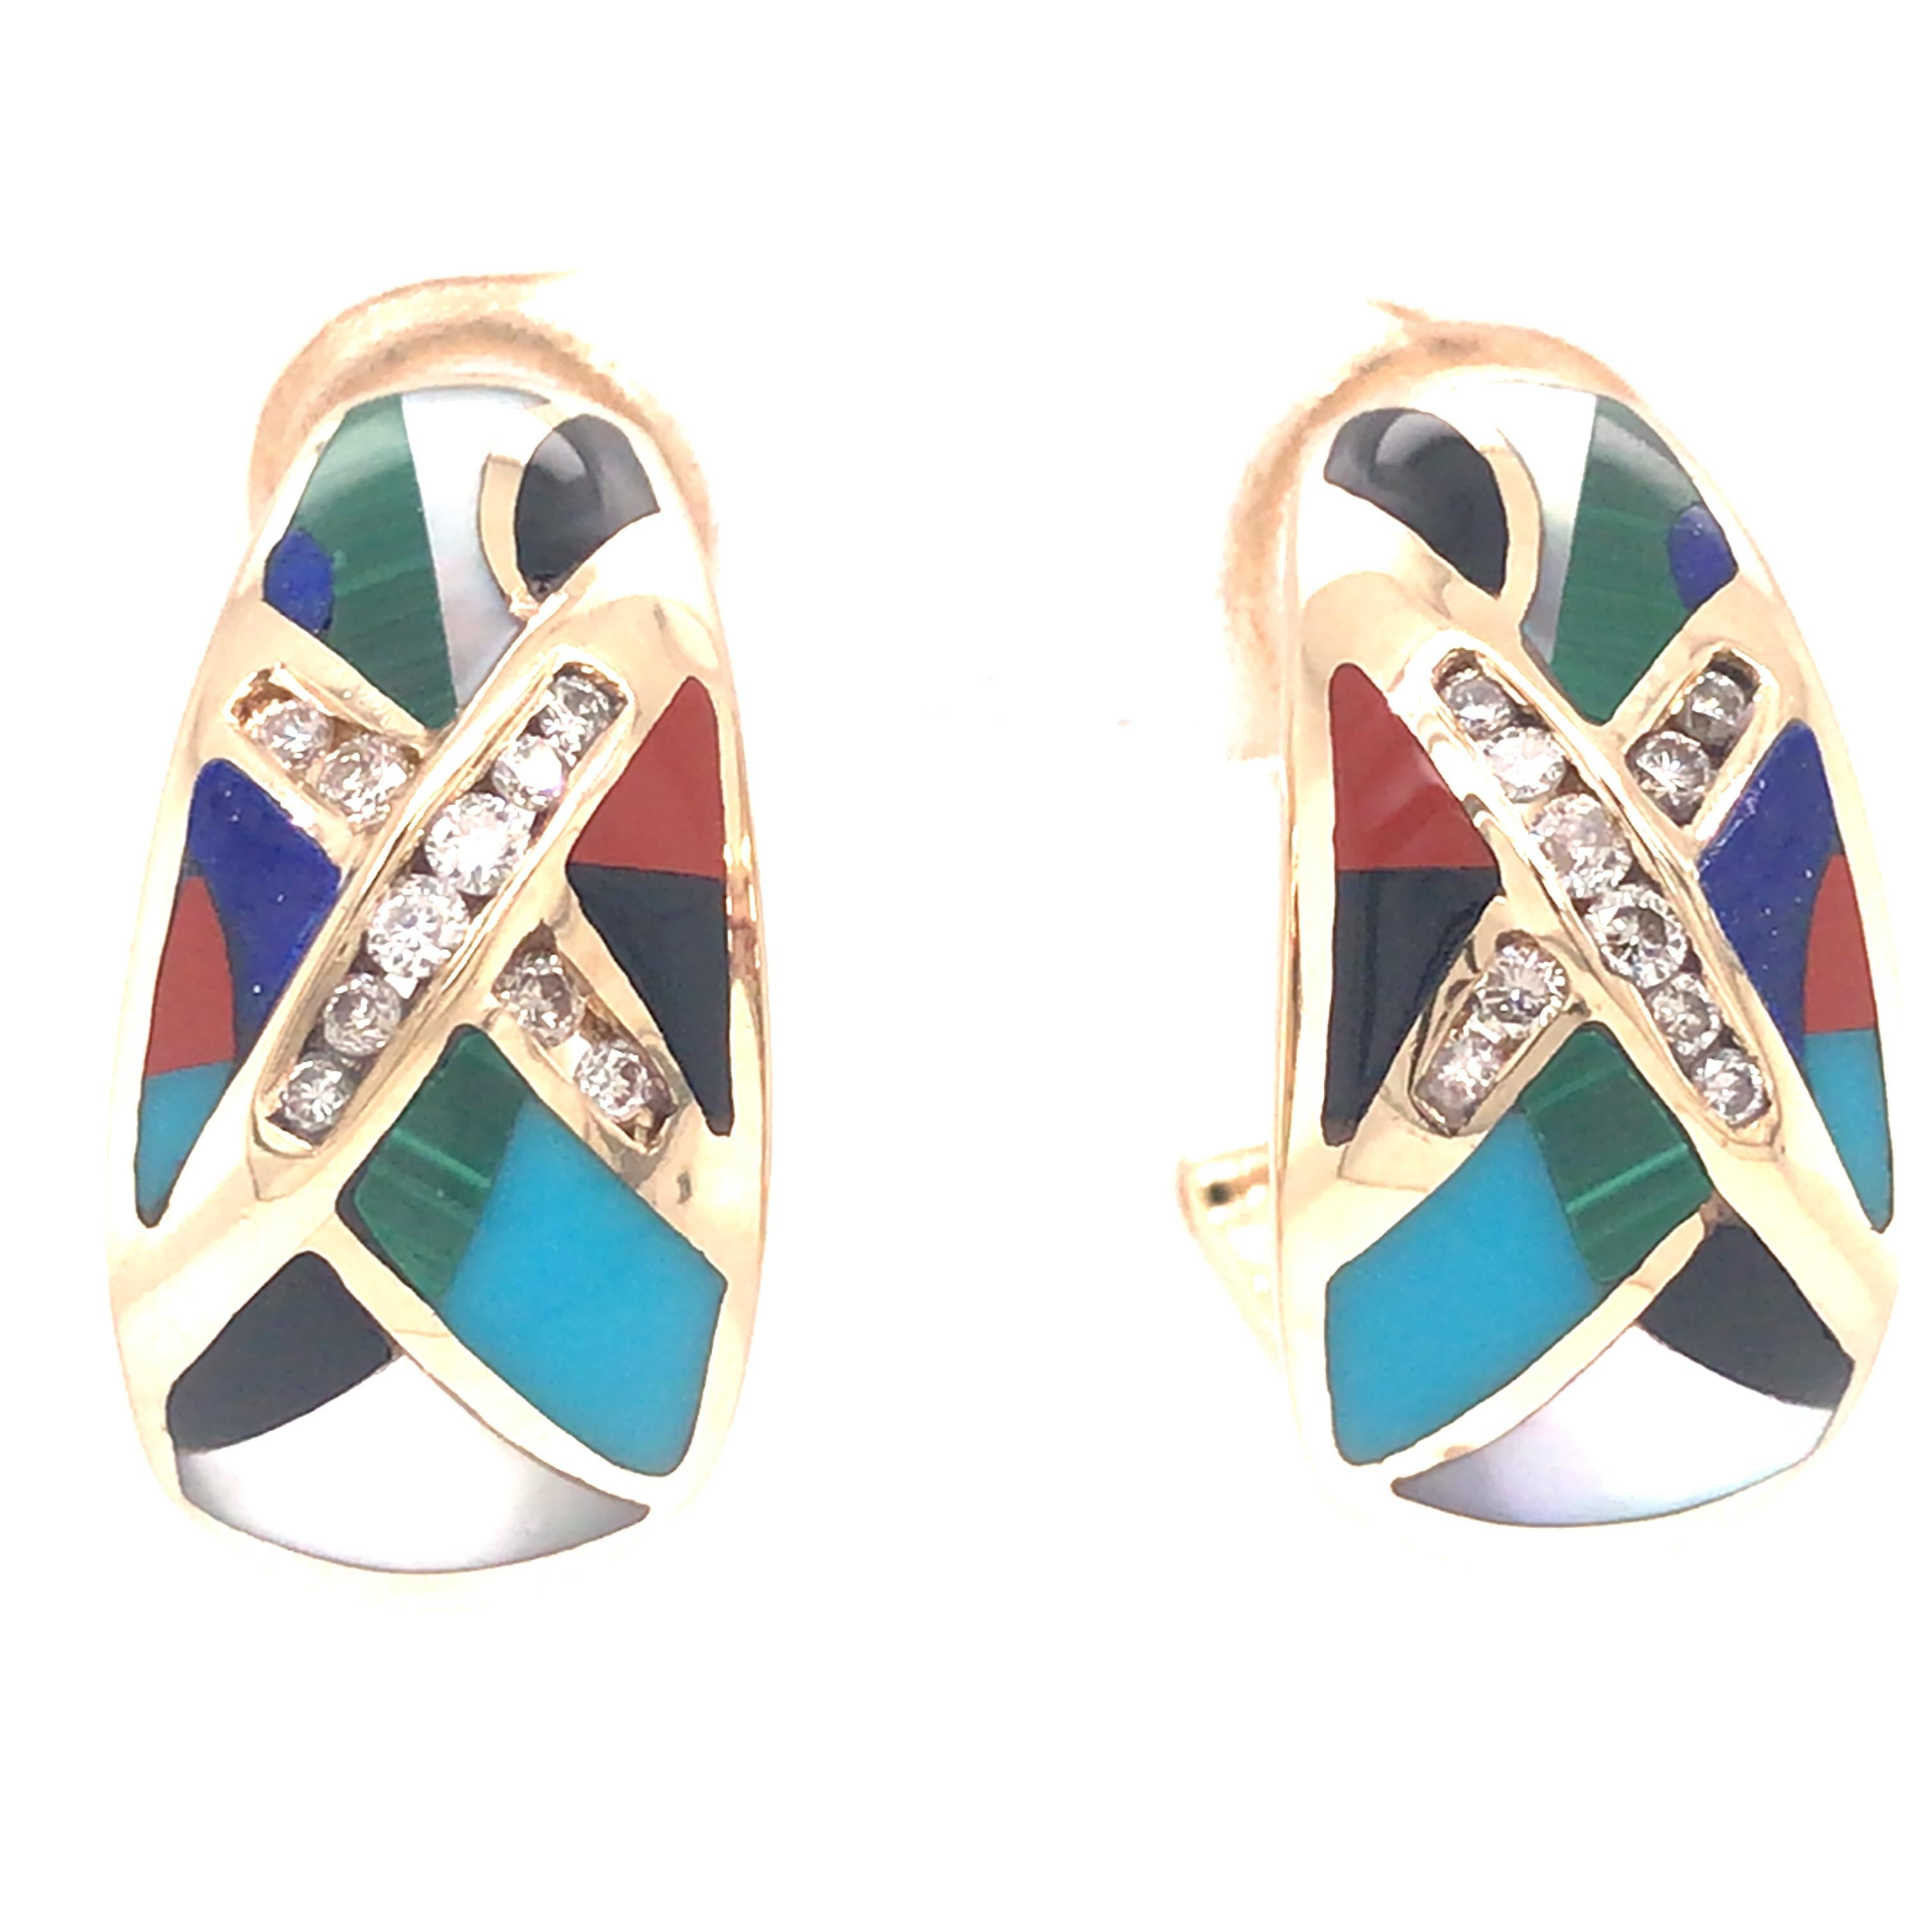 Asch Grossbardt Multistone Diamond Huggie Earring in 14K Yellow Gold.  Onyx; Mother of Pearl; Malachite; Turquoise and Carnelian re expertly set with an inset of Round Brilliant Cut Diamonds weighing 0.30 carat total weight, G-H in color and VS-SI